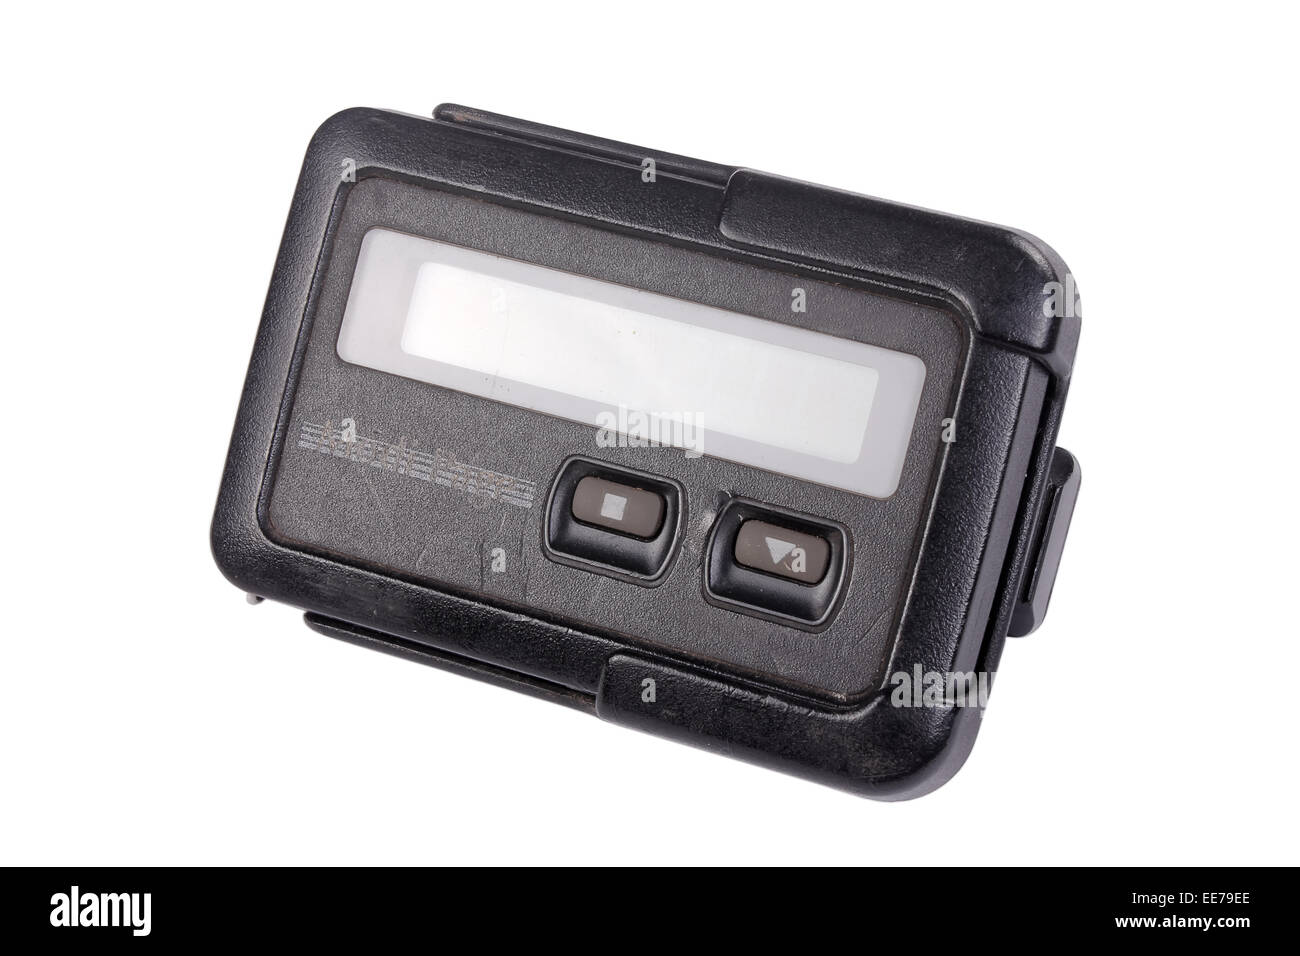 Radio Pager High Resolution Stock Photography and Images - Alamy